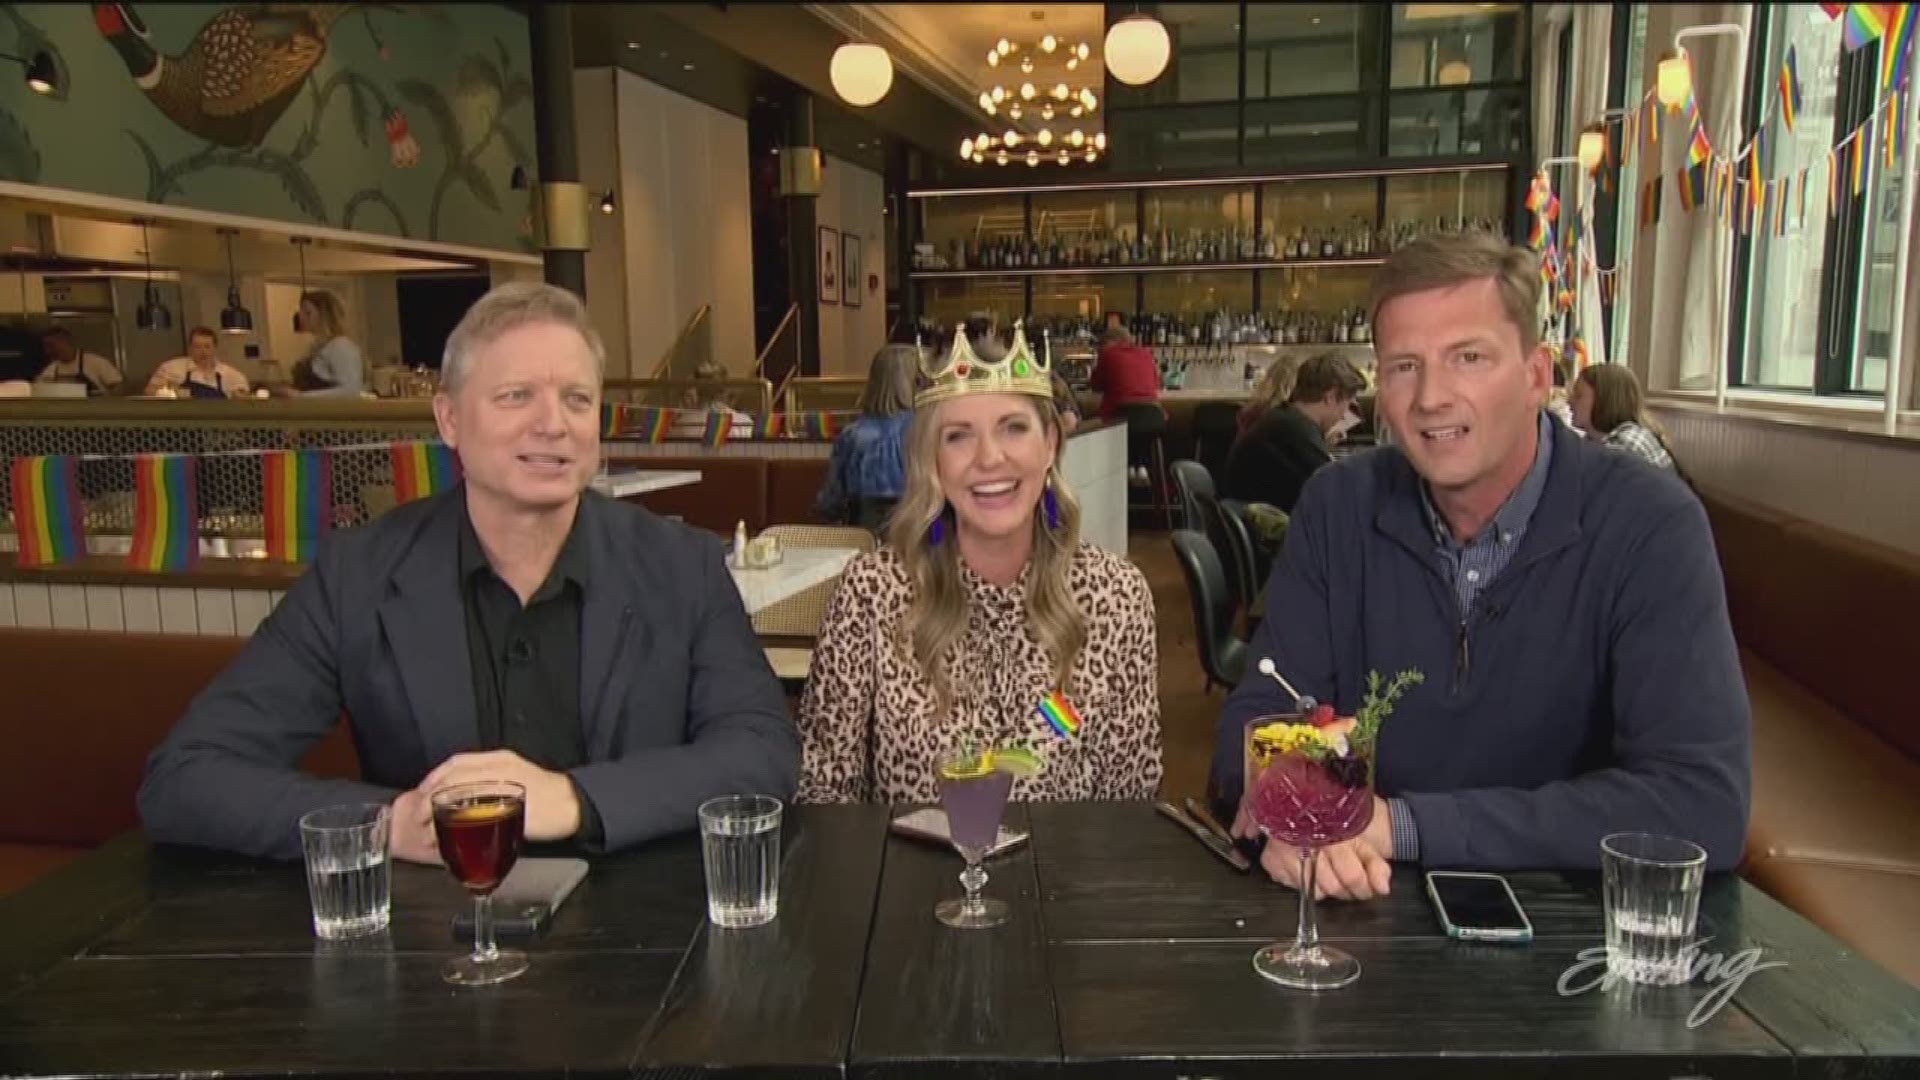 Saint Bryan, Kim Holcomb and Jim Dever host from Ben Paris. FEATURING: A Dare Dever on the Ninja Warrior course, the Sleepless In Seattle couple, That's a Thing, a Ninja Warrior interview, Snoqualmie Casino summer concerts, and JF Miniature Donkeys.